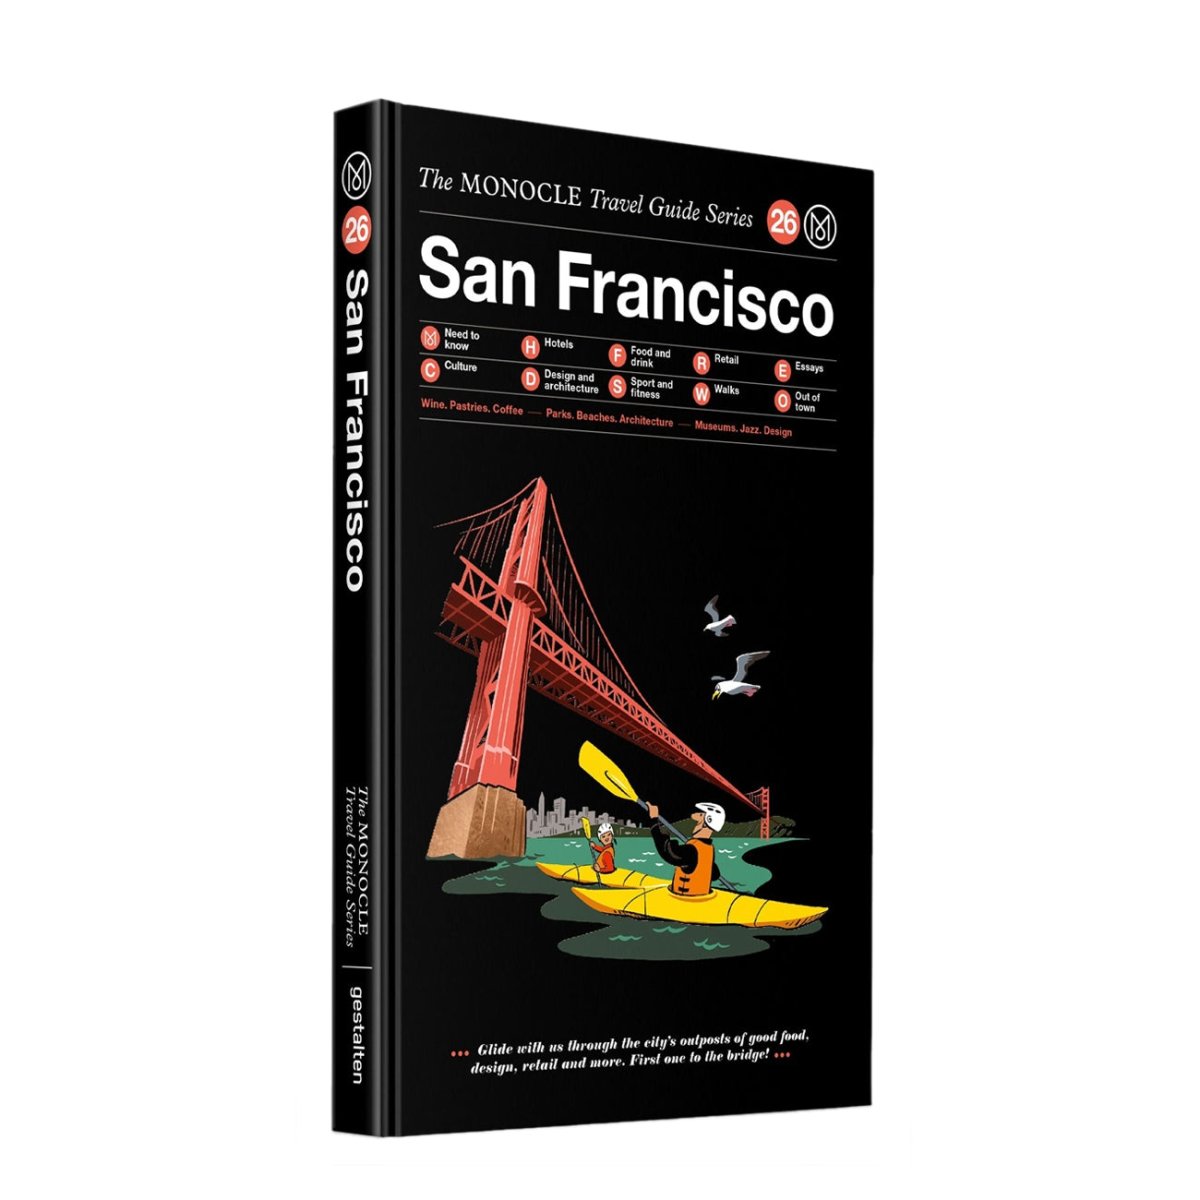 Gestalten: The Monocle Travel Guide Series - San Francisco  - Allike Store